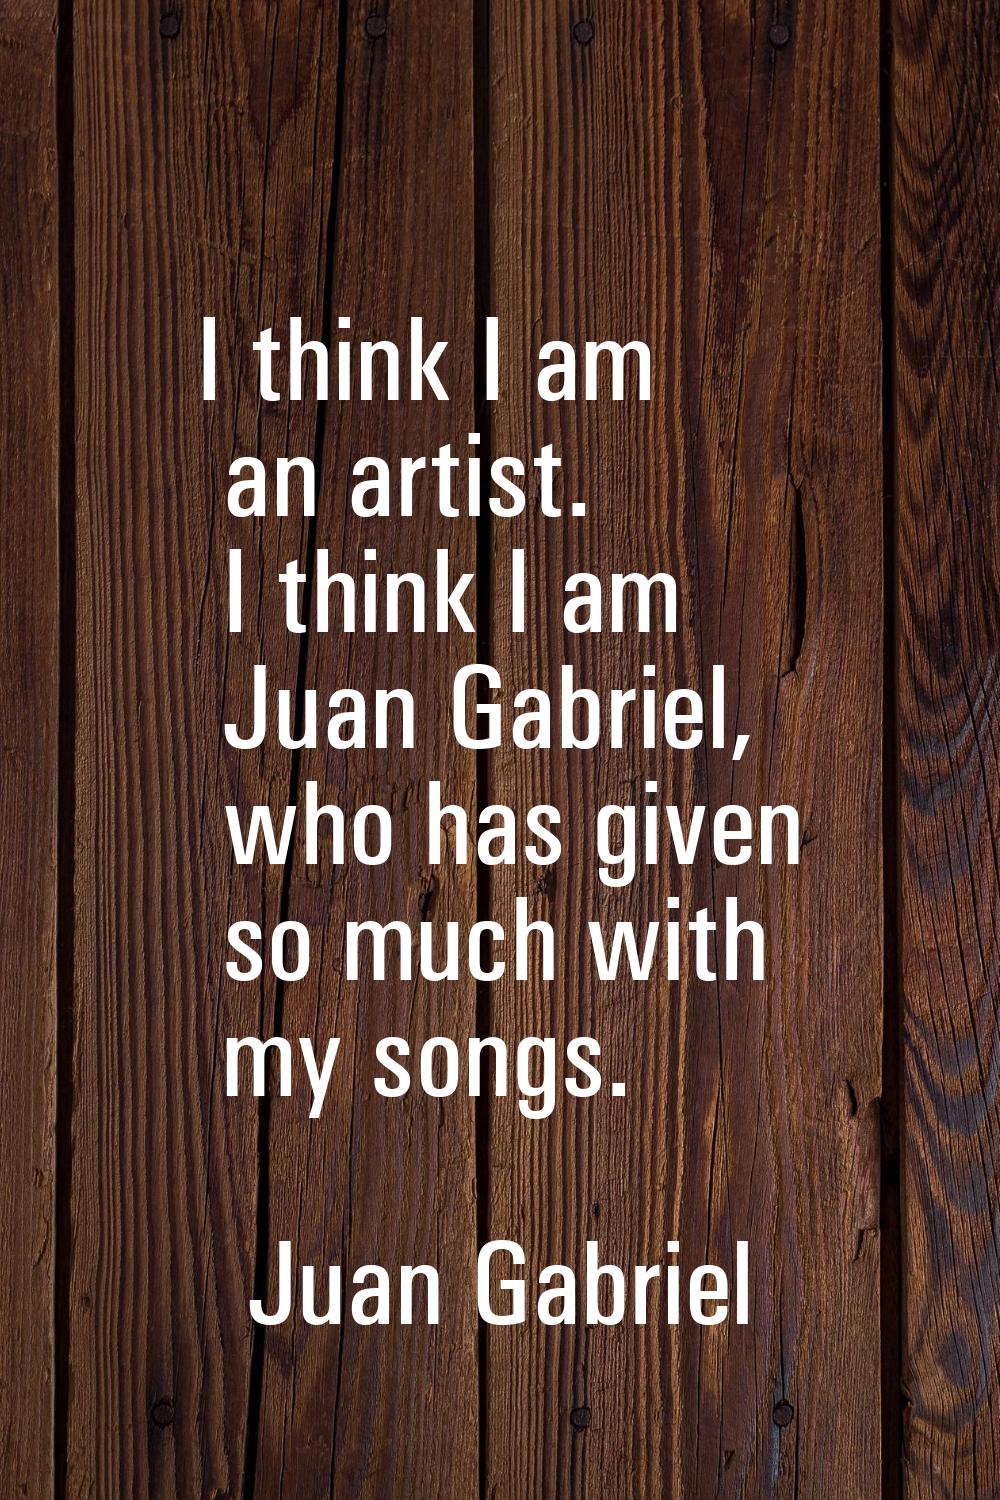 I think I am an artist. I think I am Juan Gabriel, who has given so much with my songs.